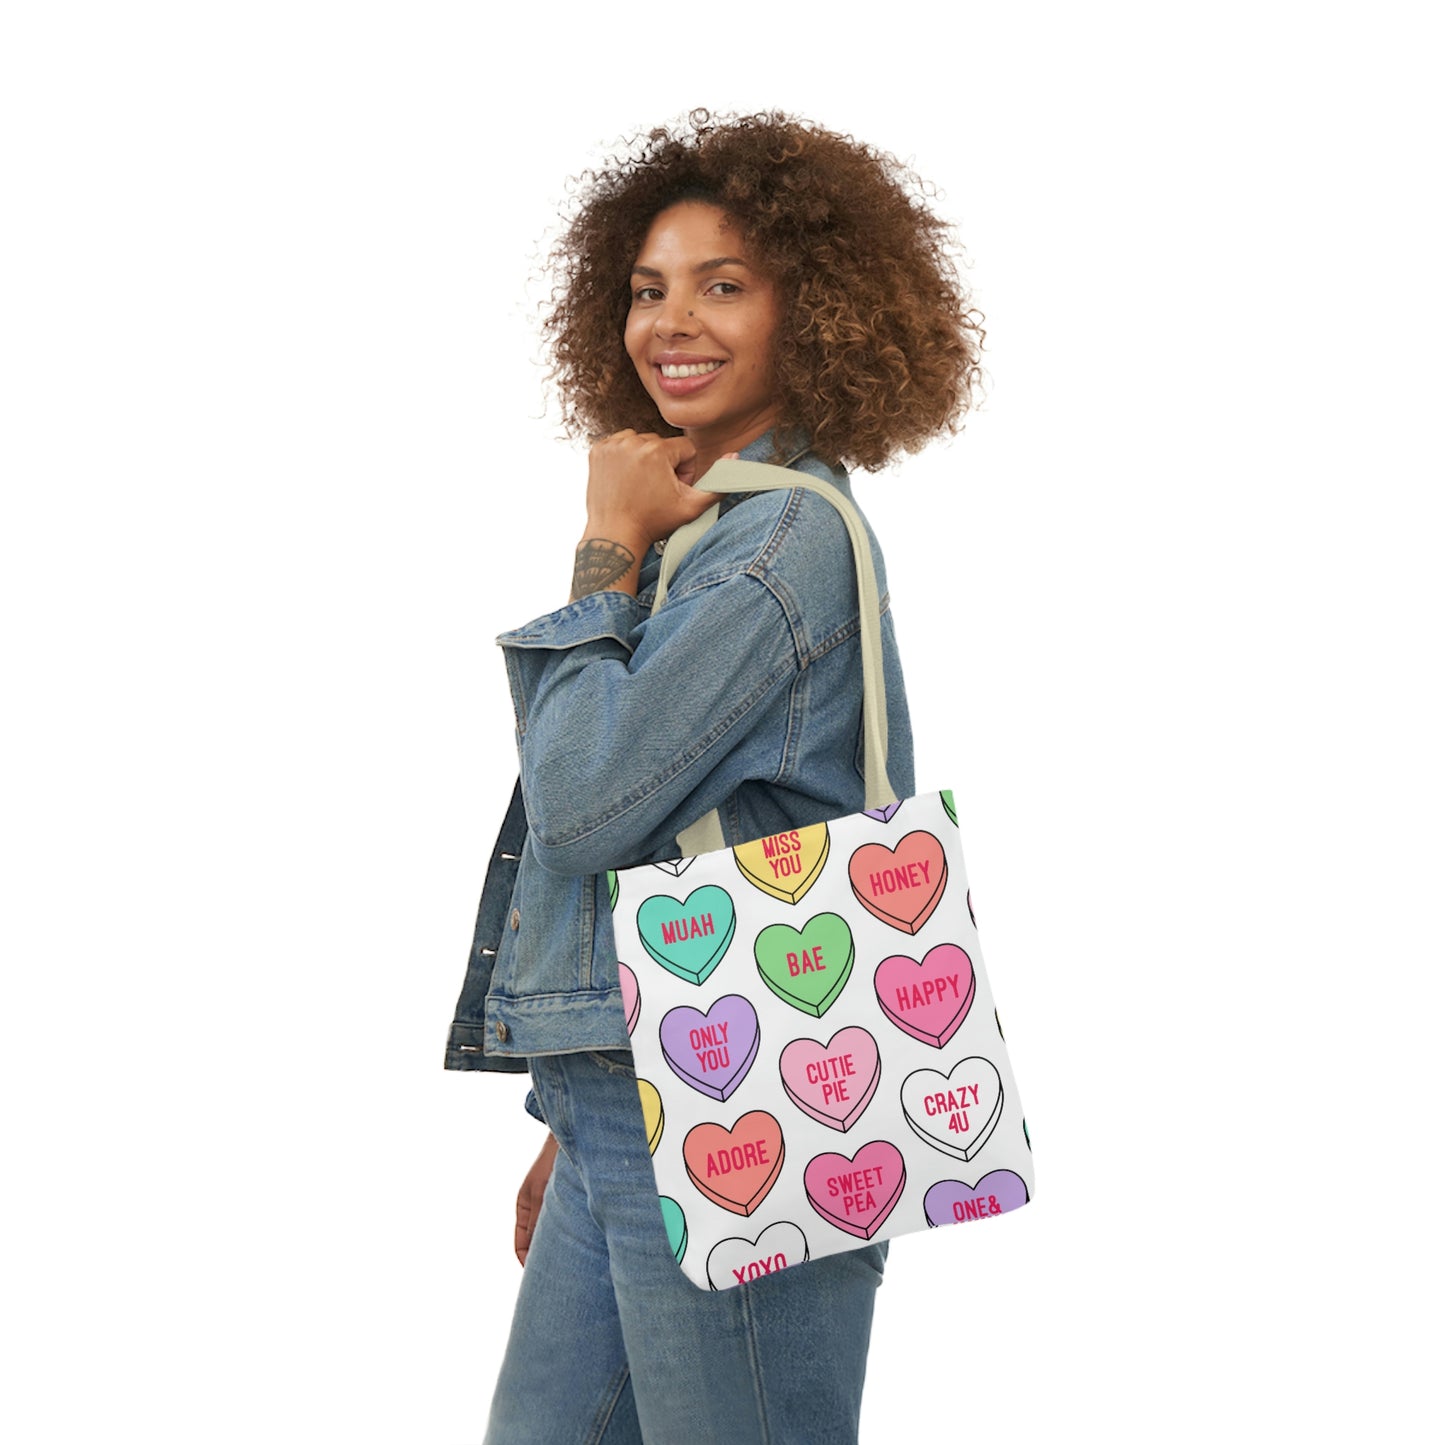 Candy Conversation Hearts Canvas Tote Bag